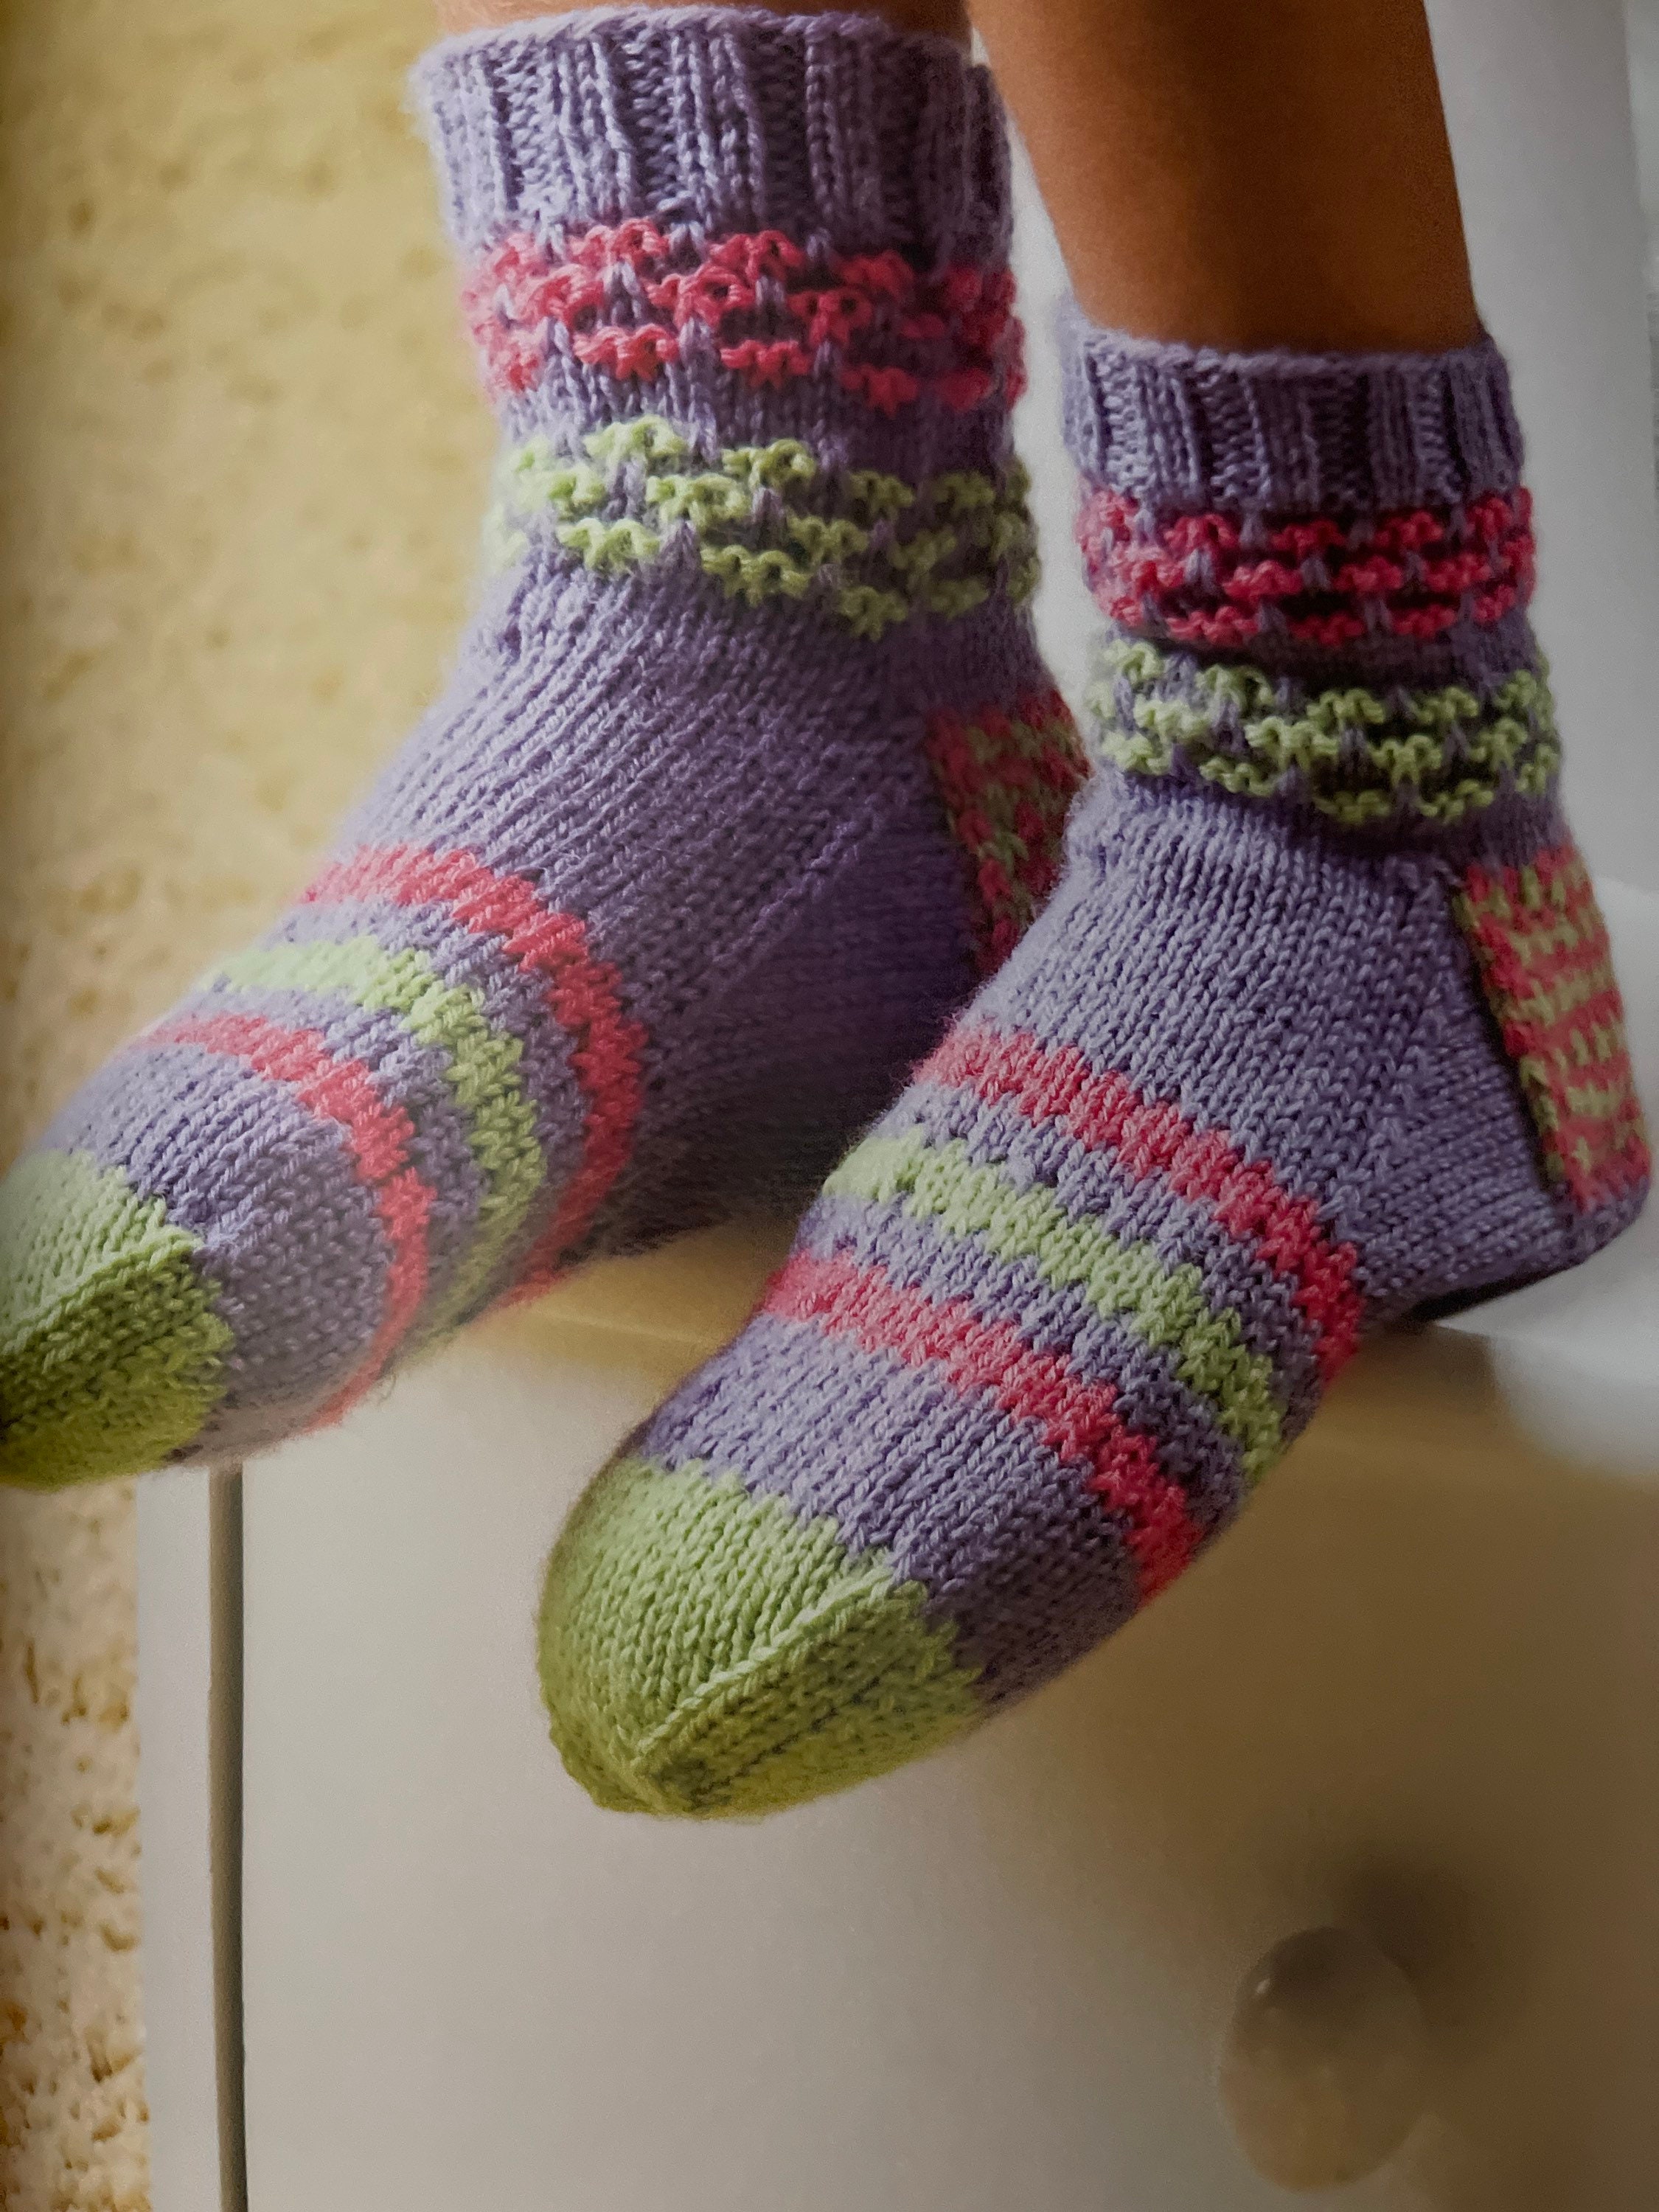 How to Knit Socks: Three Methods Made Easy by Edie Eckman - Etsy